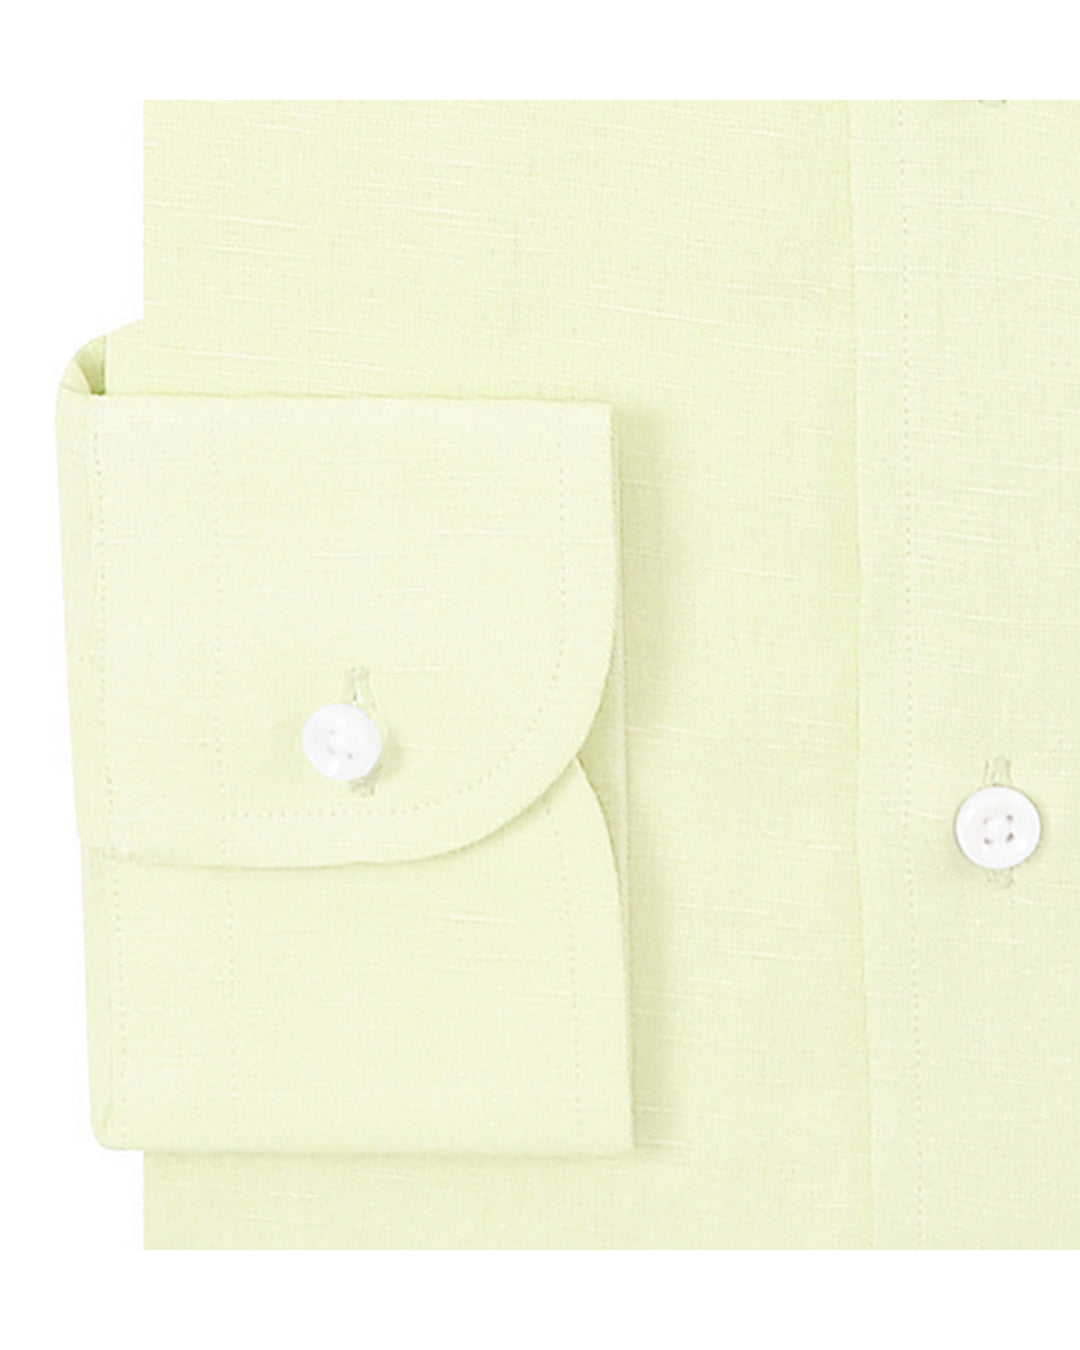 Cuff of the custom linen shirt for men in pale yellow by Luxire Clothing